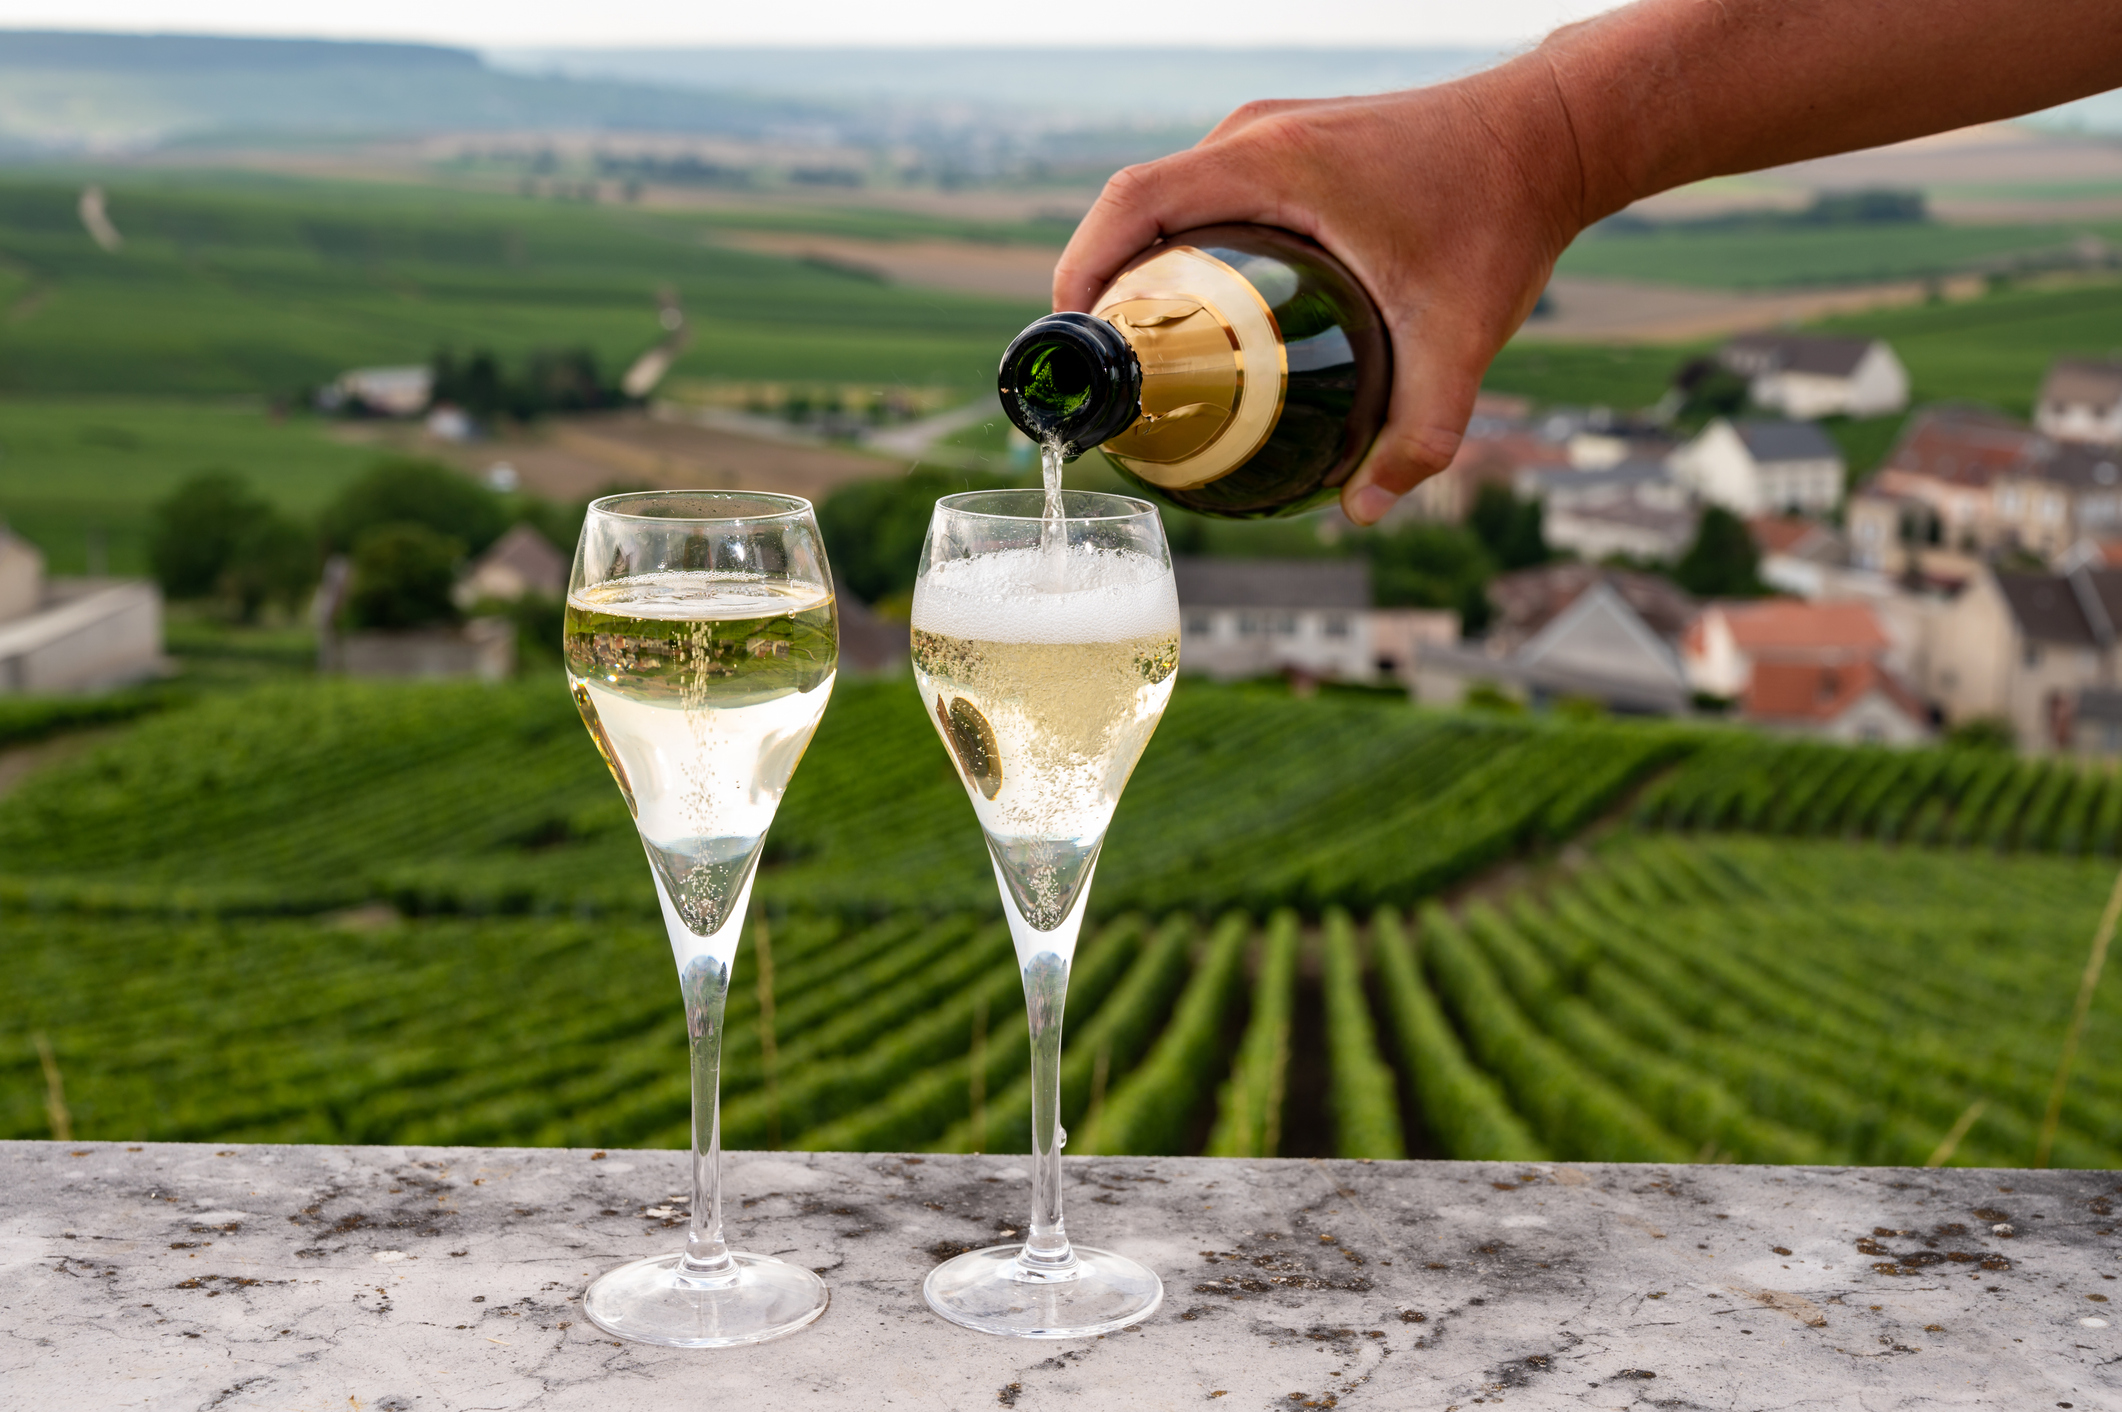 Explore France's champagne capital, the home of Veuve Clicquot's